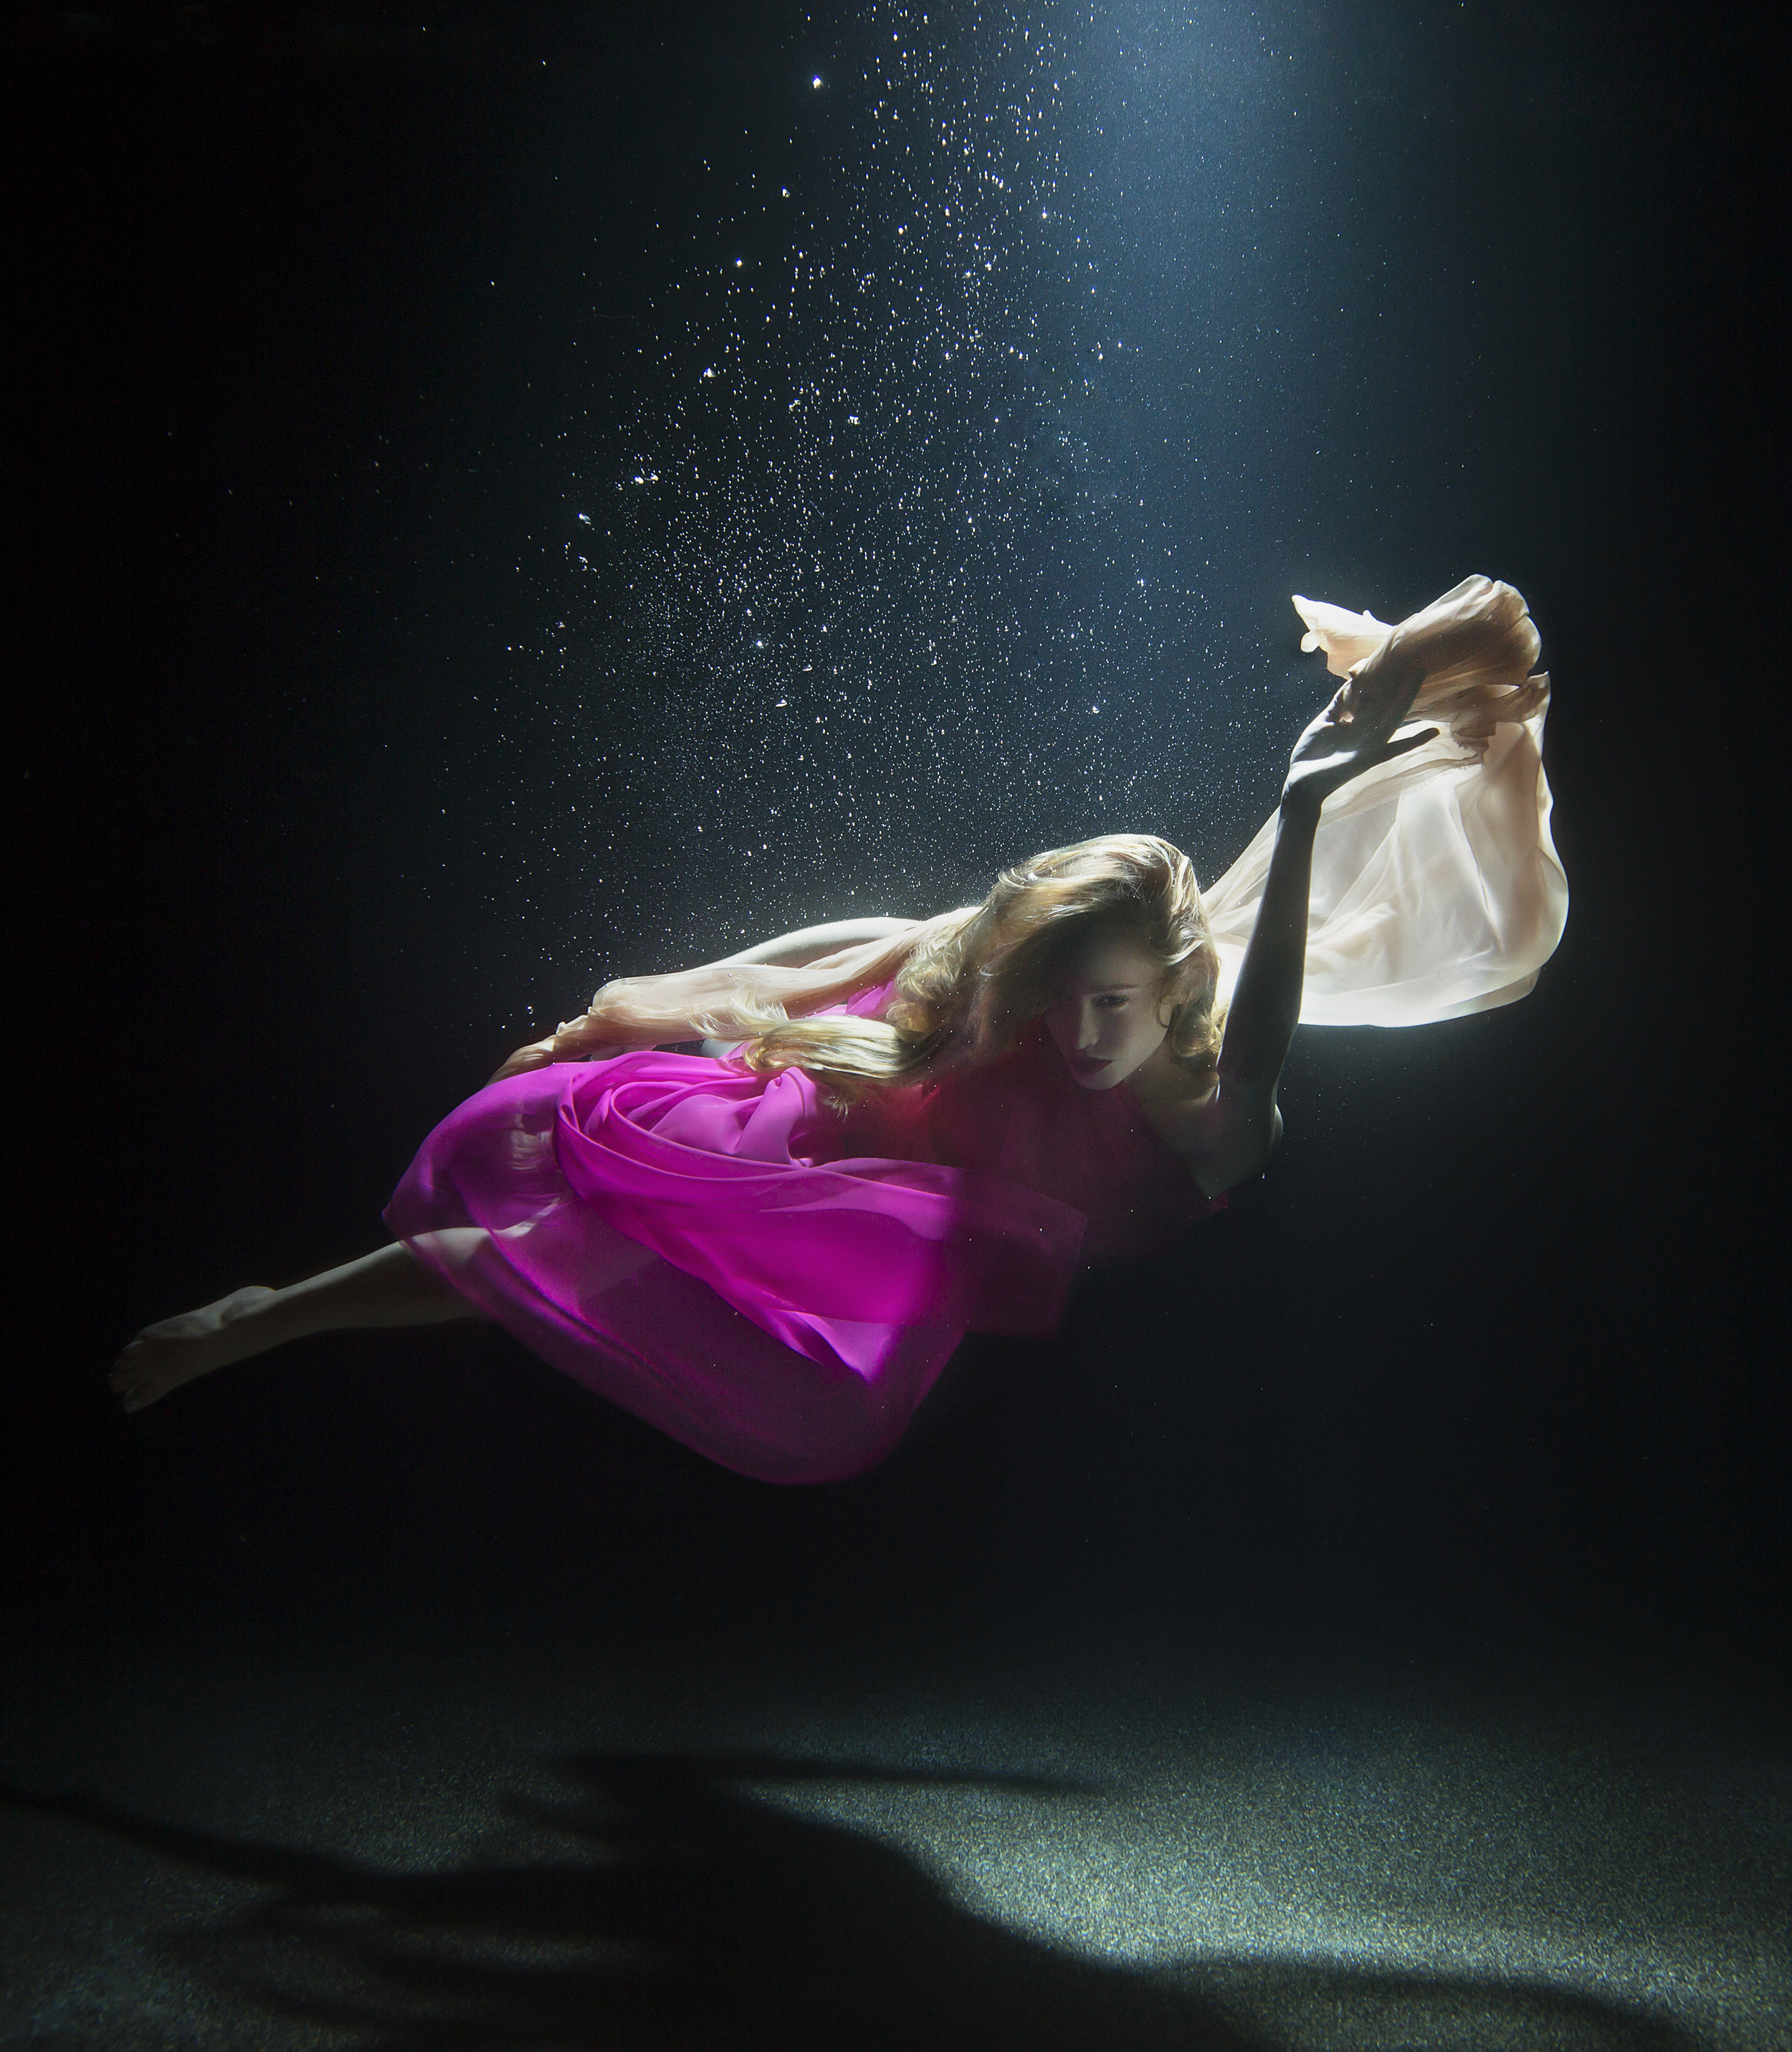 Underwater Hair, Fashion and Beauty Images edited at Thomas Canny Studio.jpg